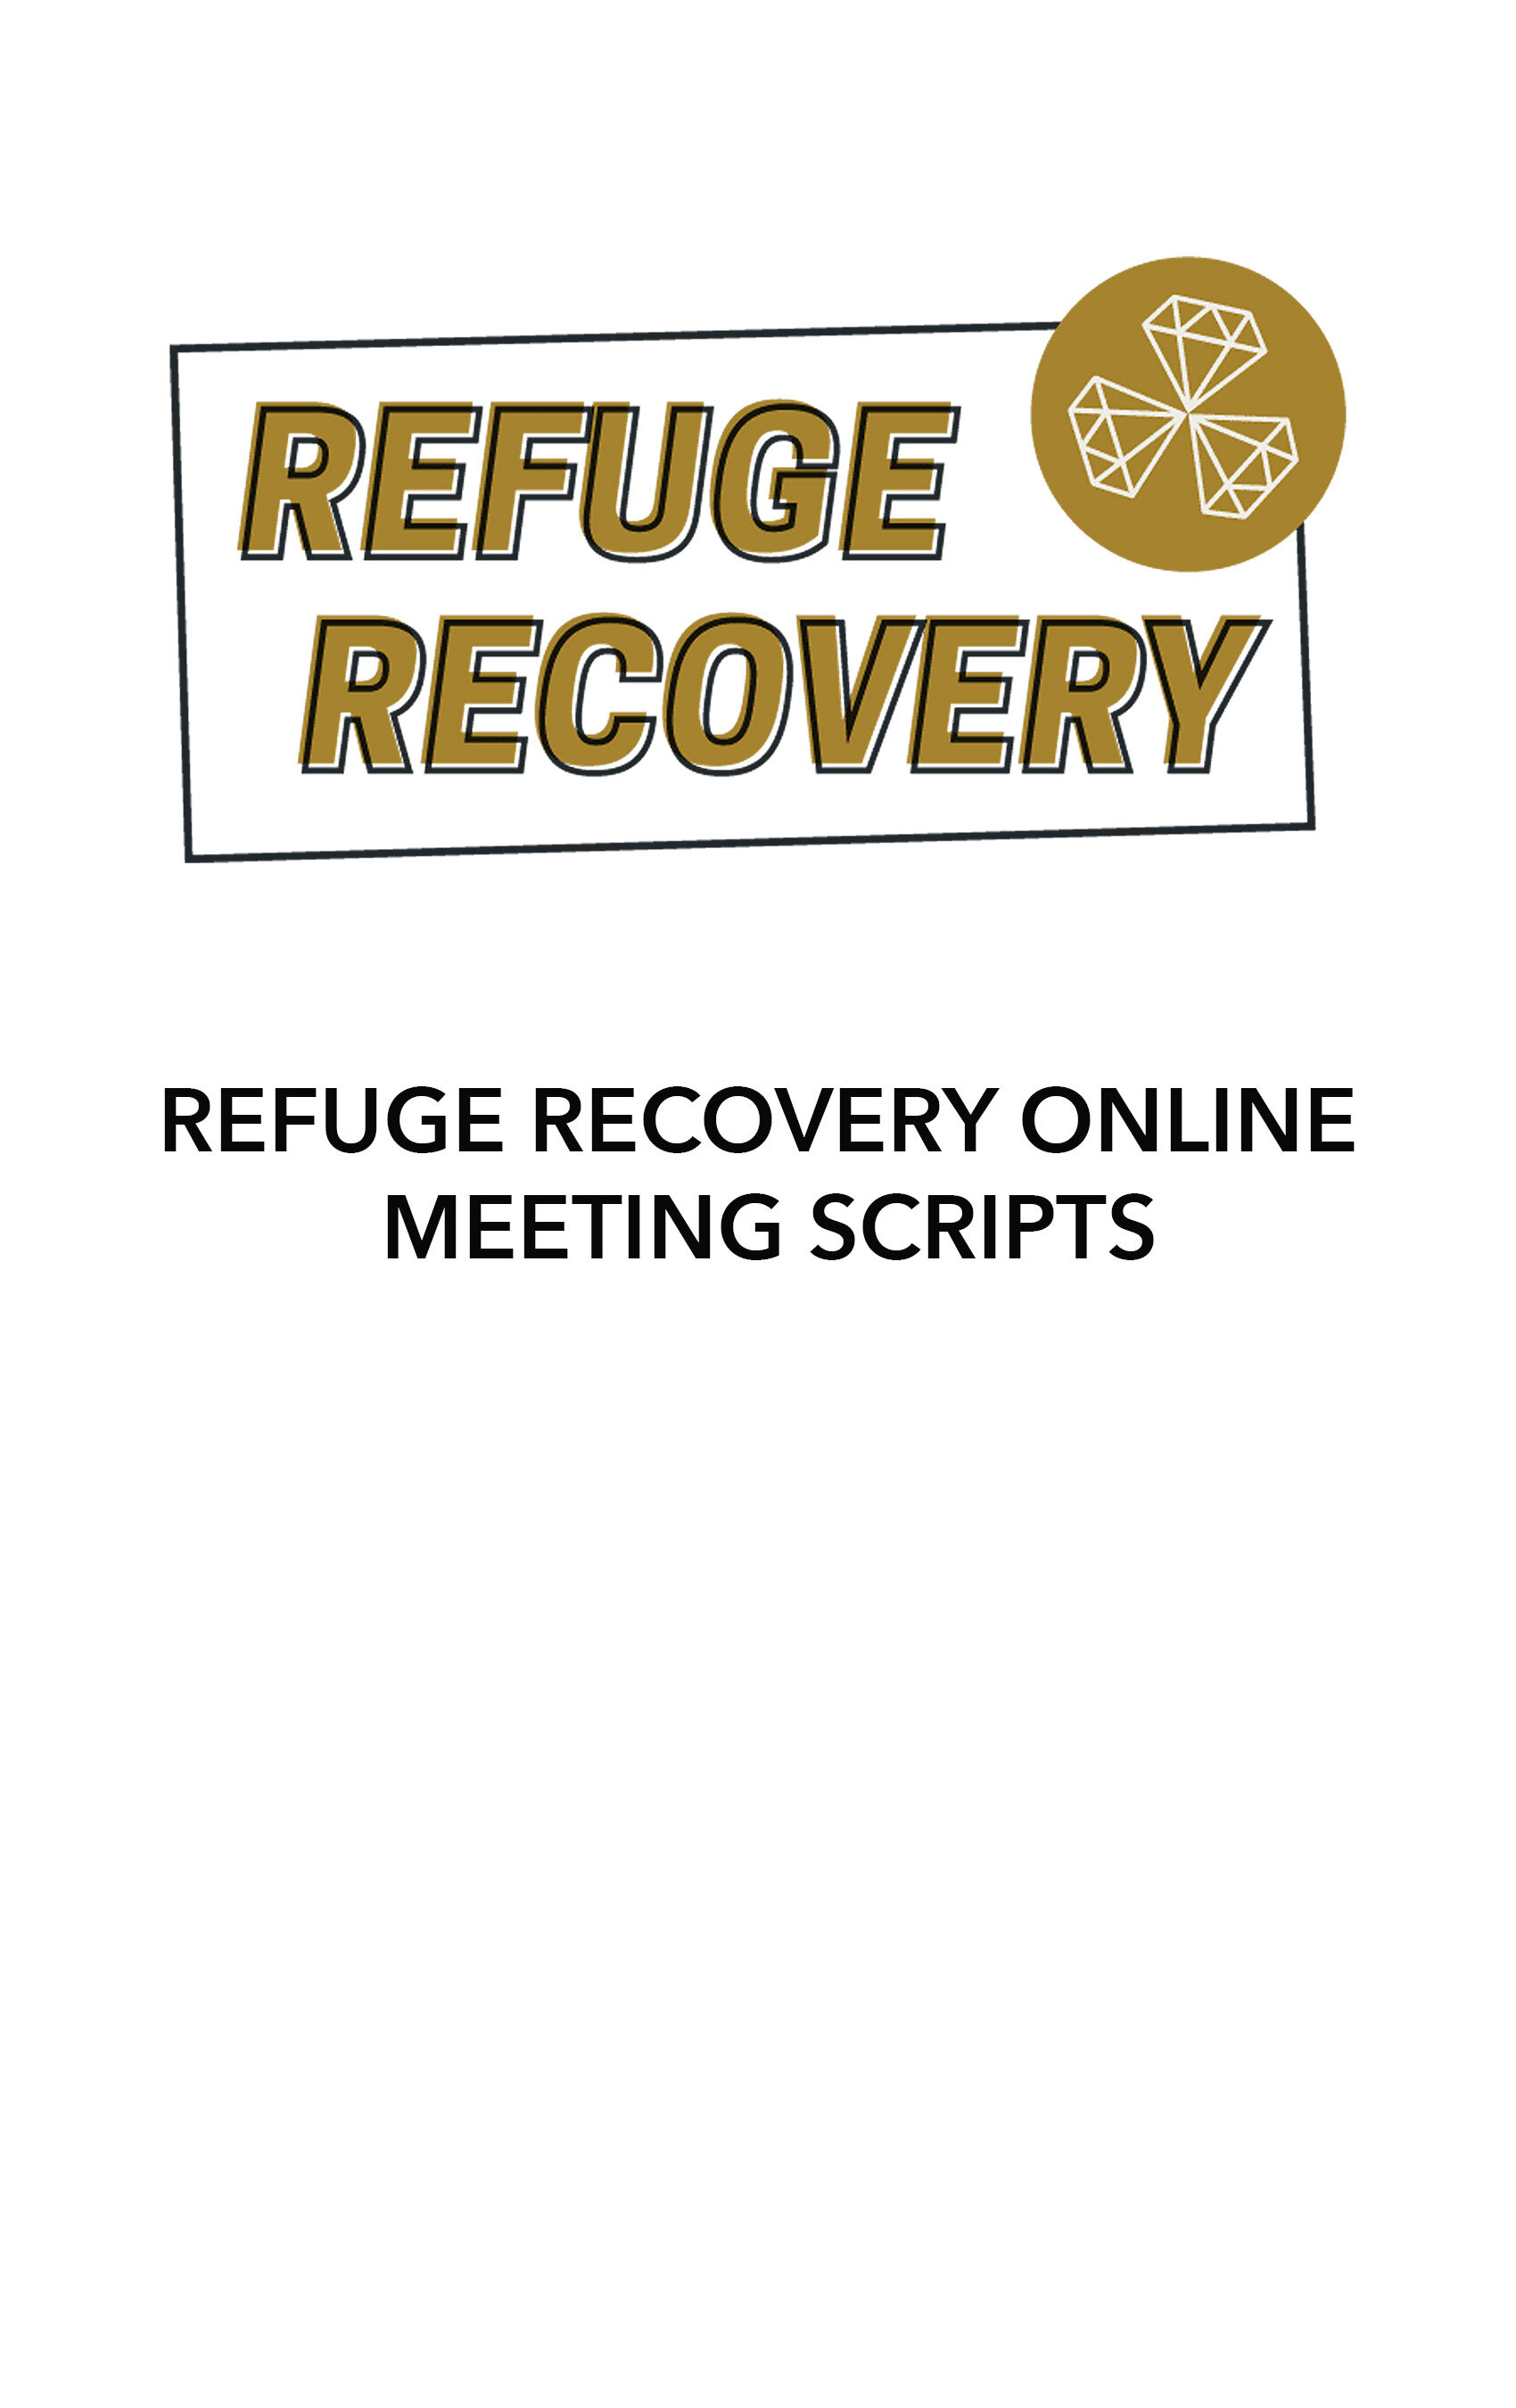 online-SCRIPTS-cover-Recovered.jpg